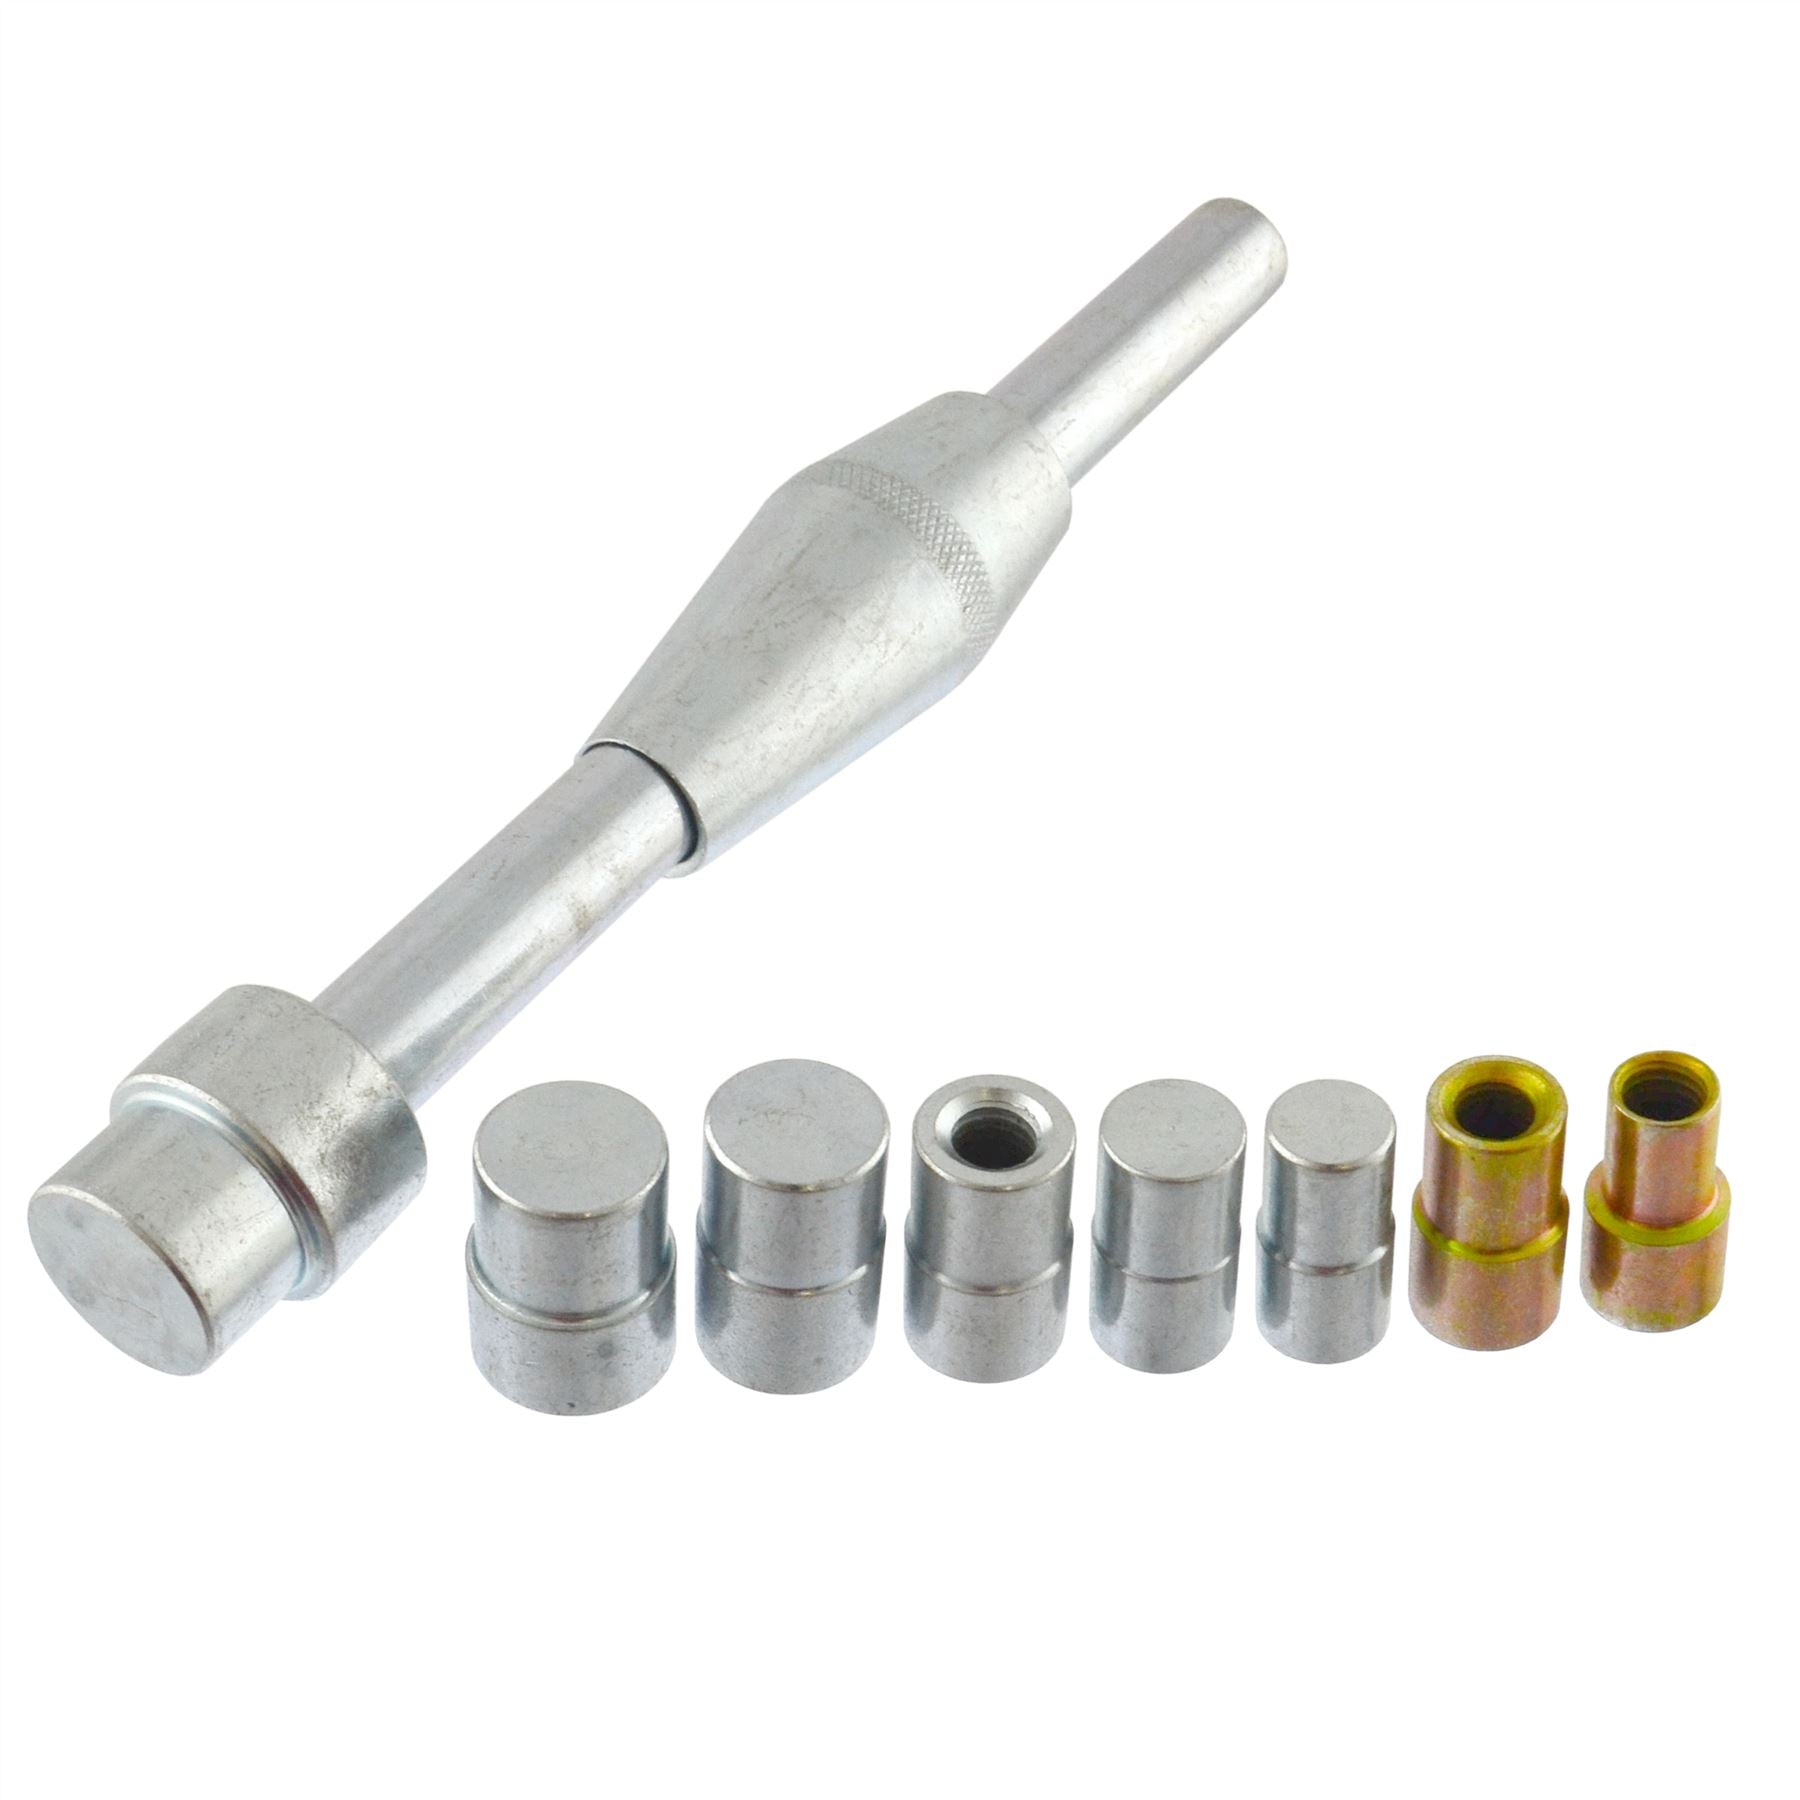 Clutch Alignment Aligning Tool Universal Set Replacing Clutches 9pc Metric SAE